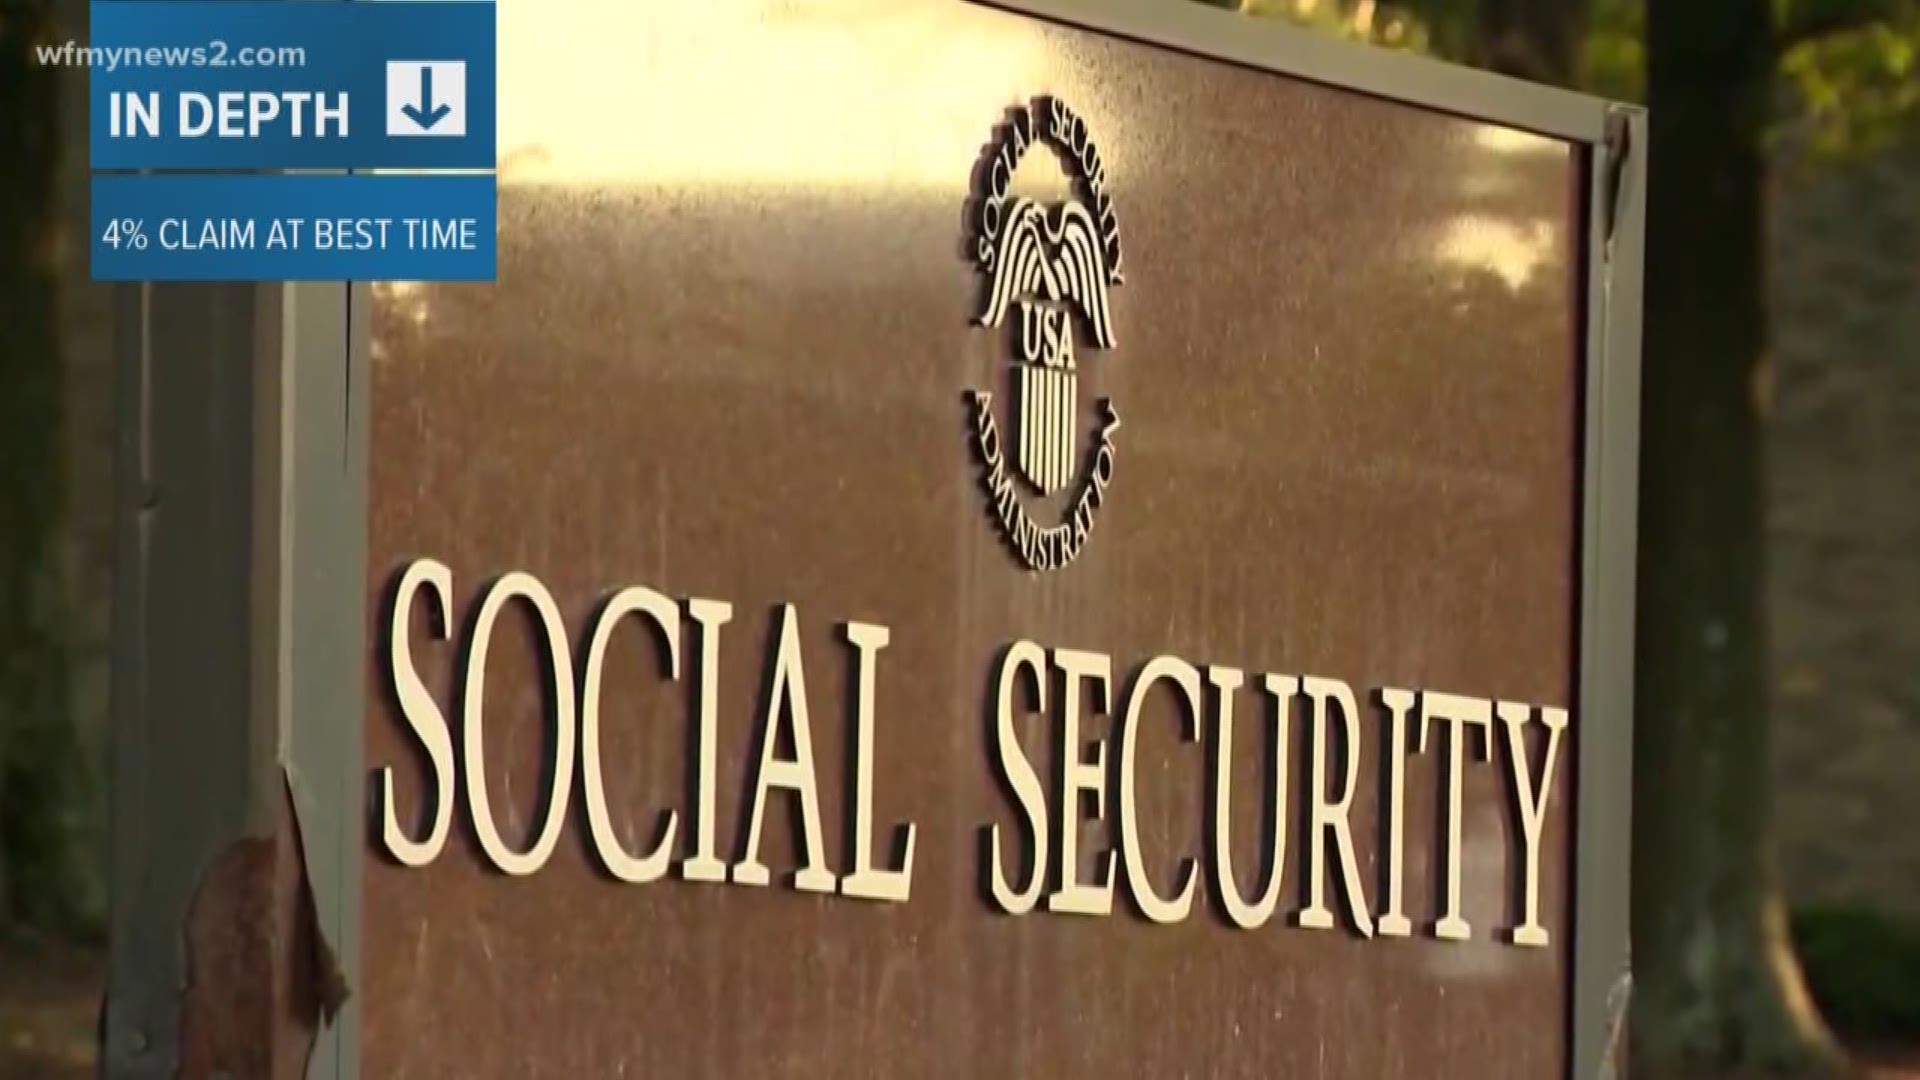 Americans are losing money by withdrawing their social security benefits at the wrong time.